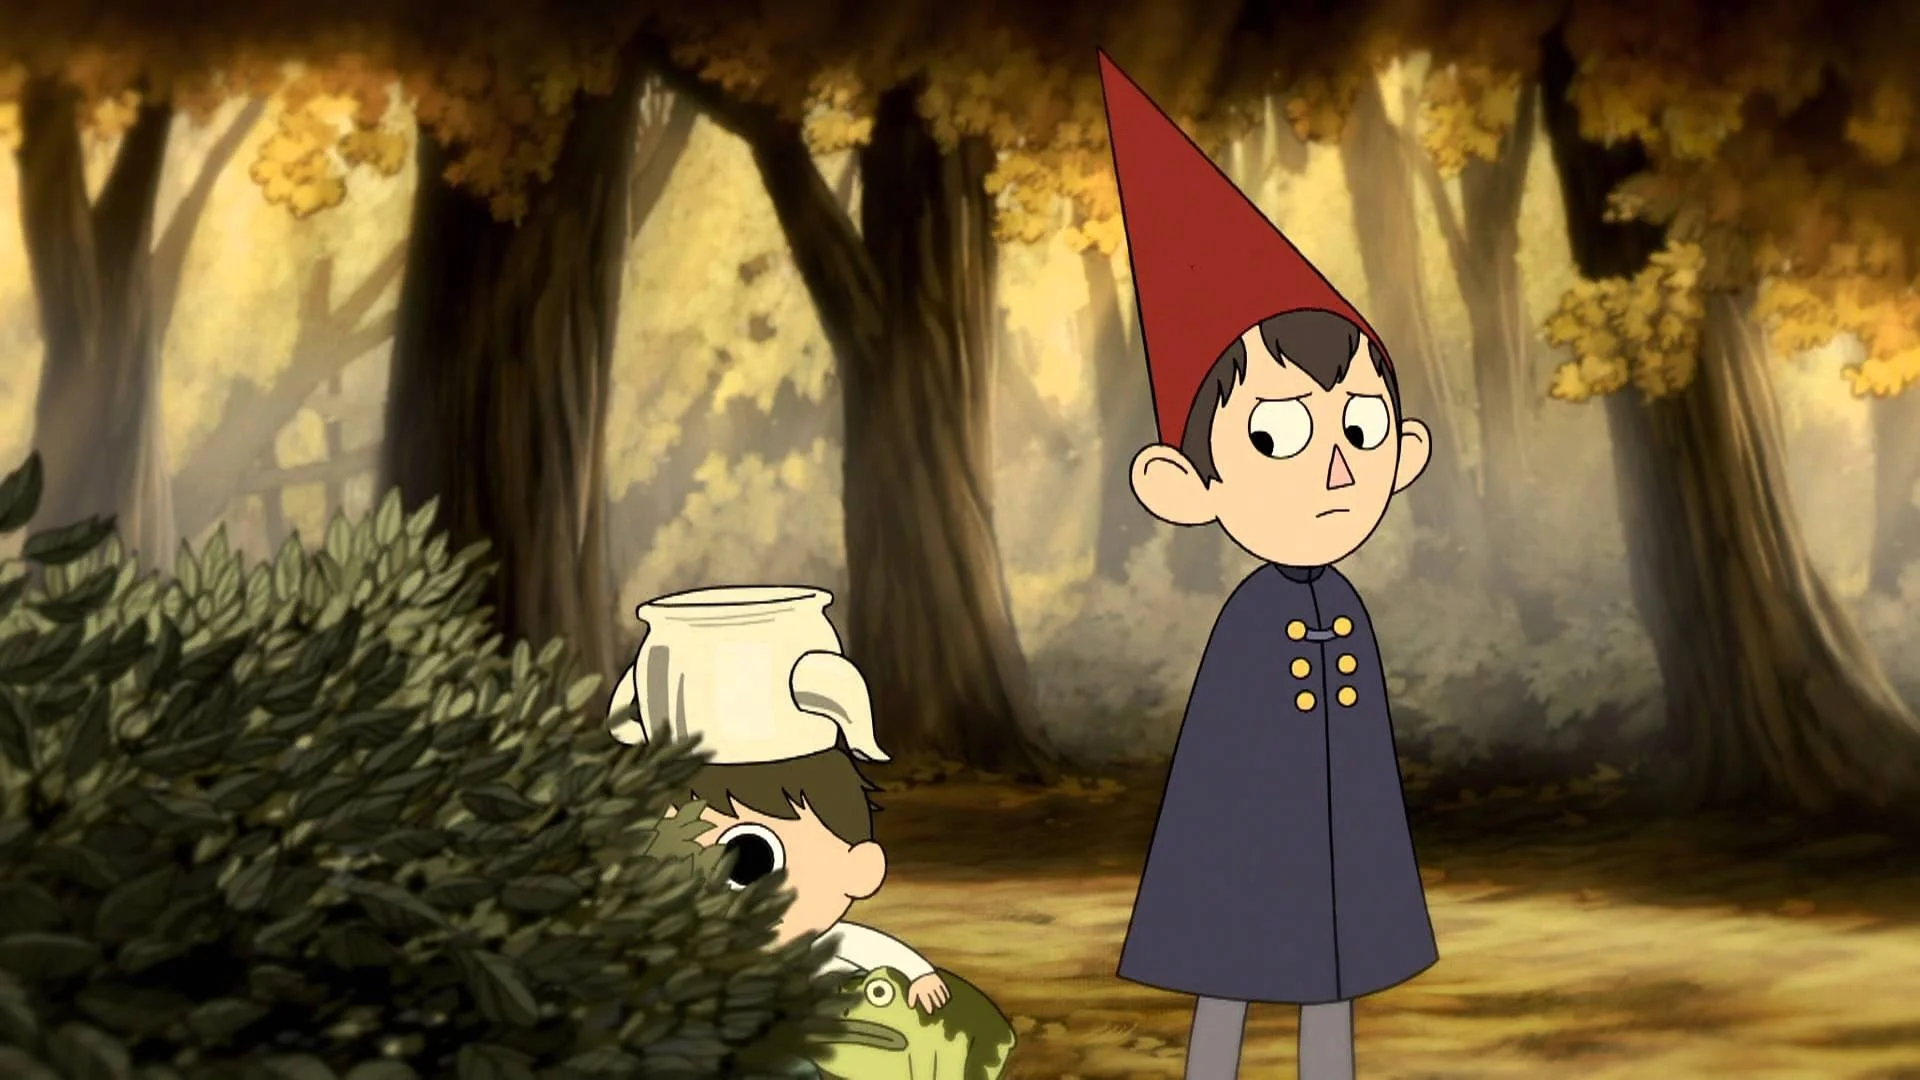 Over the Garden Wall Wallpaper, Wirt and Greg